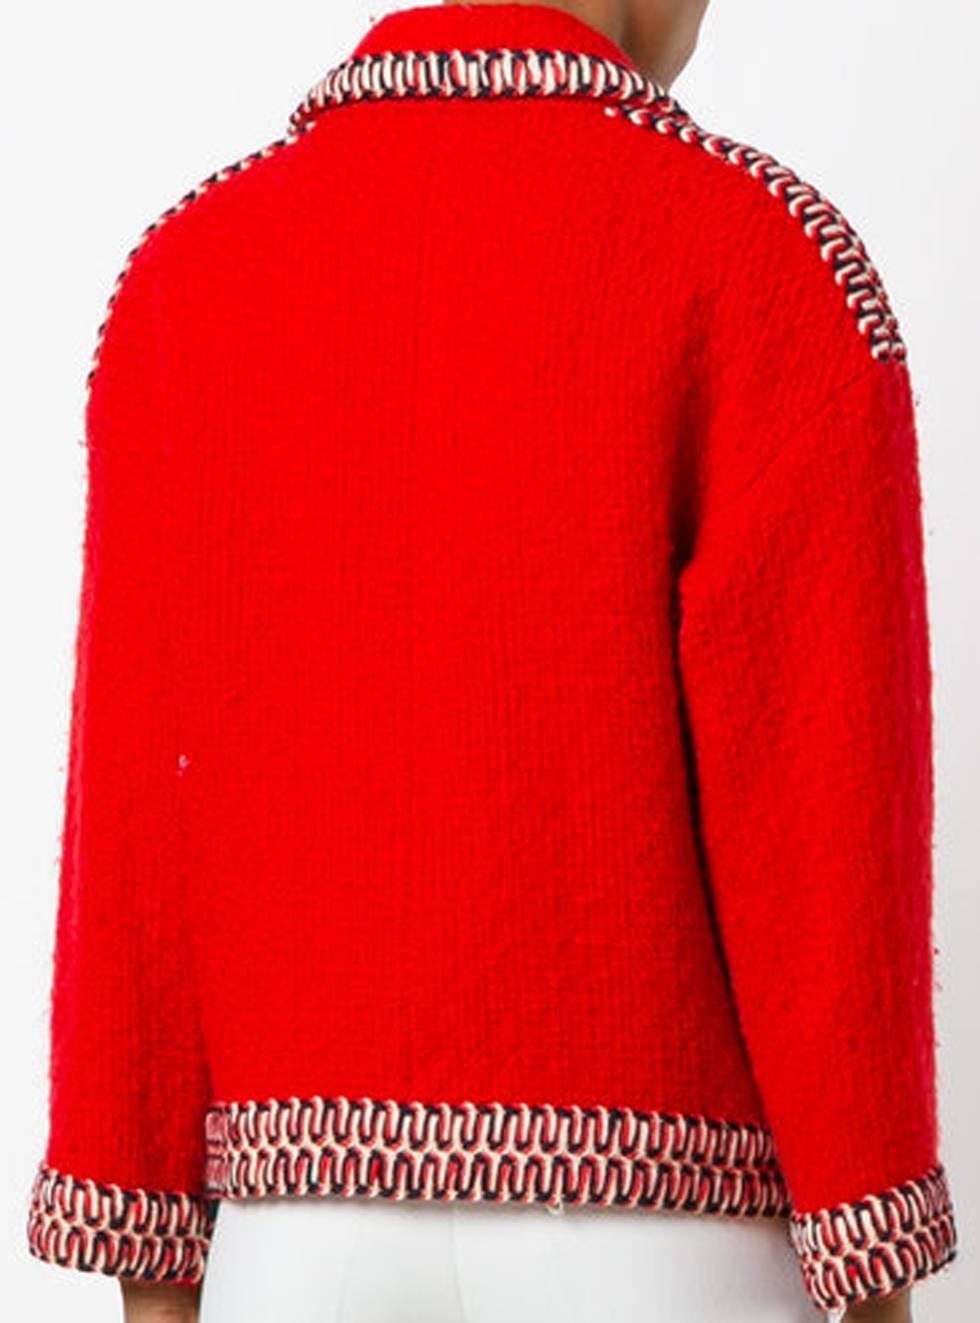 Chanel red wool boucle jacket featuring a boxy shape, a fancy contrasted large ribbon, center front gold-tone logo buttons opening, 2 patched pockets, a silk lining. 
Composition: 55% wool, 45% polyamide 
In excellent vintage condition. Made in